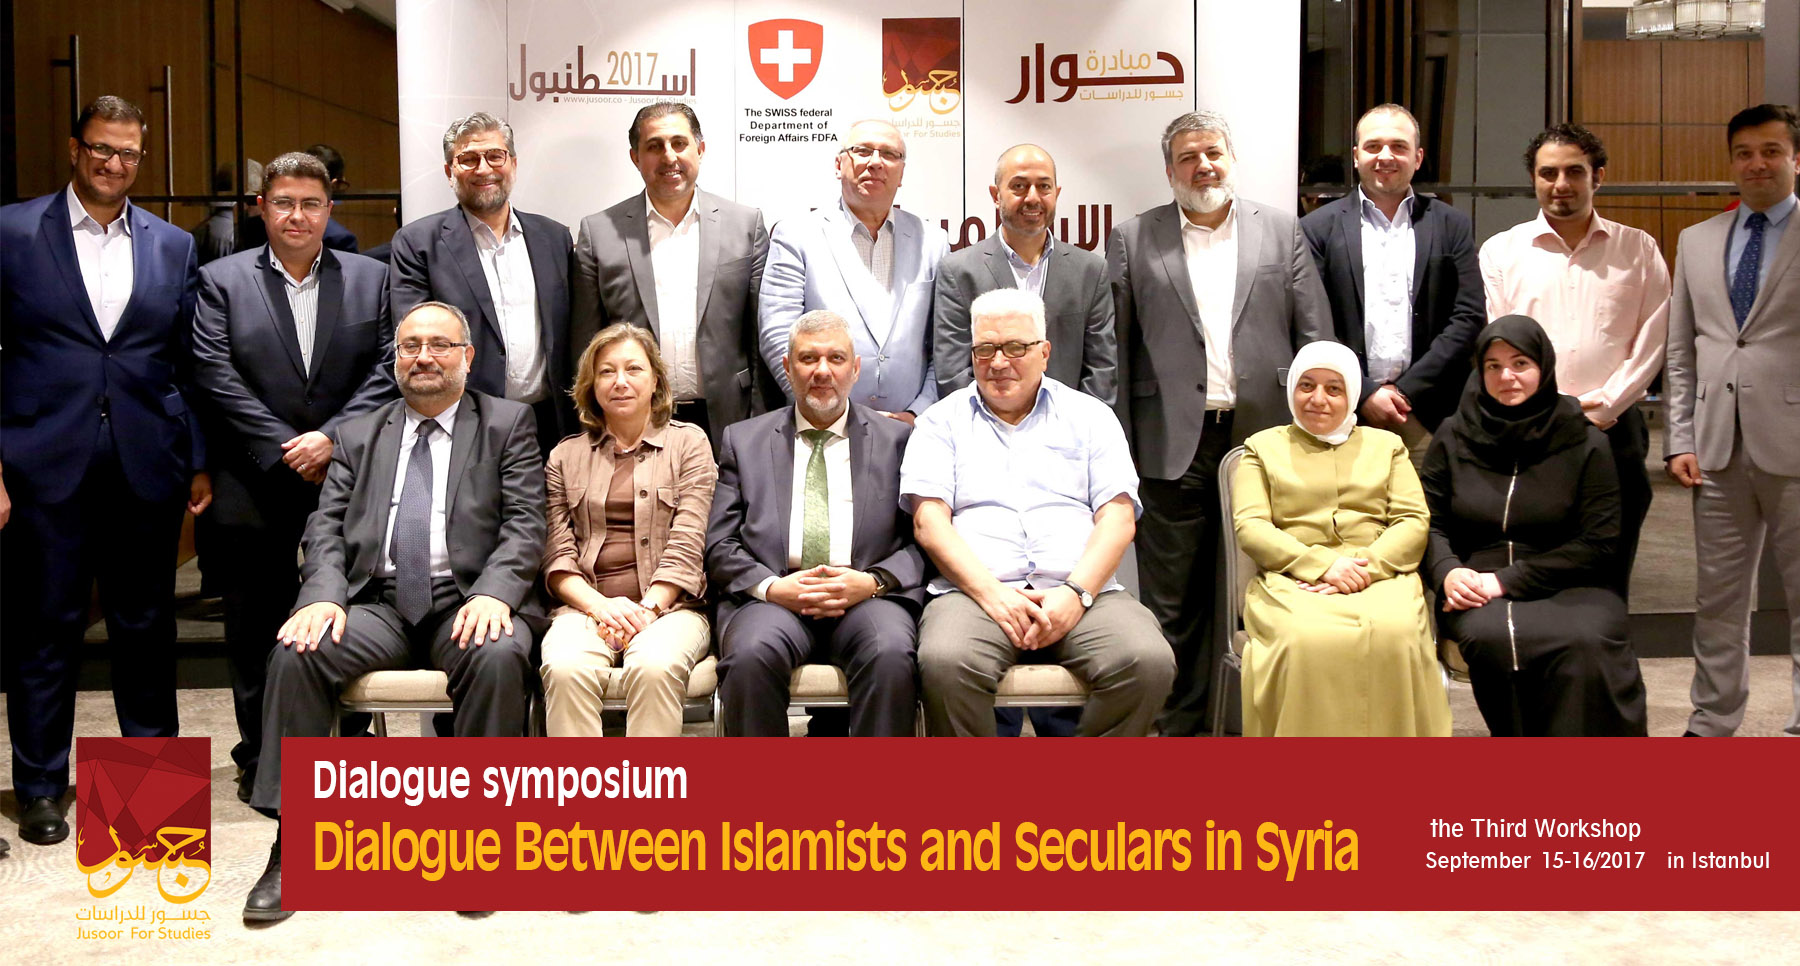 The Third Meeting Of "Dialogue Between Islamists and Seculars in Syria" Workshop